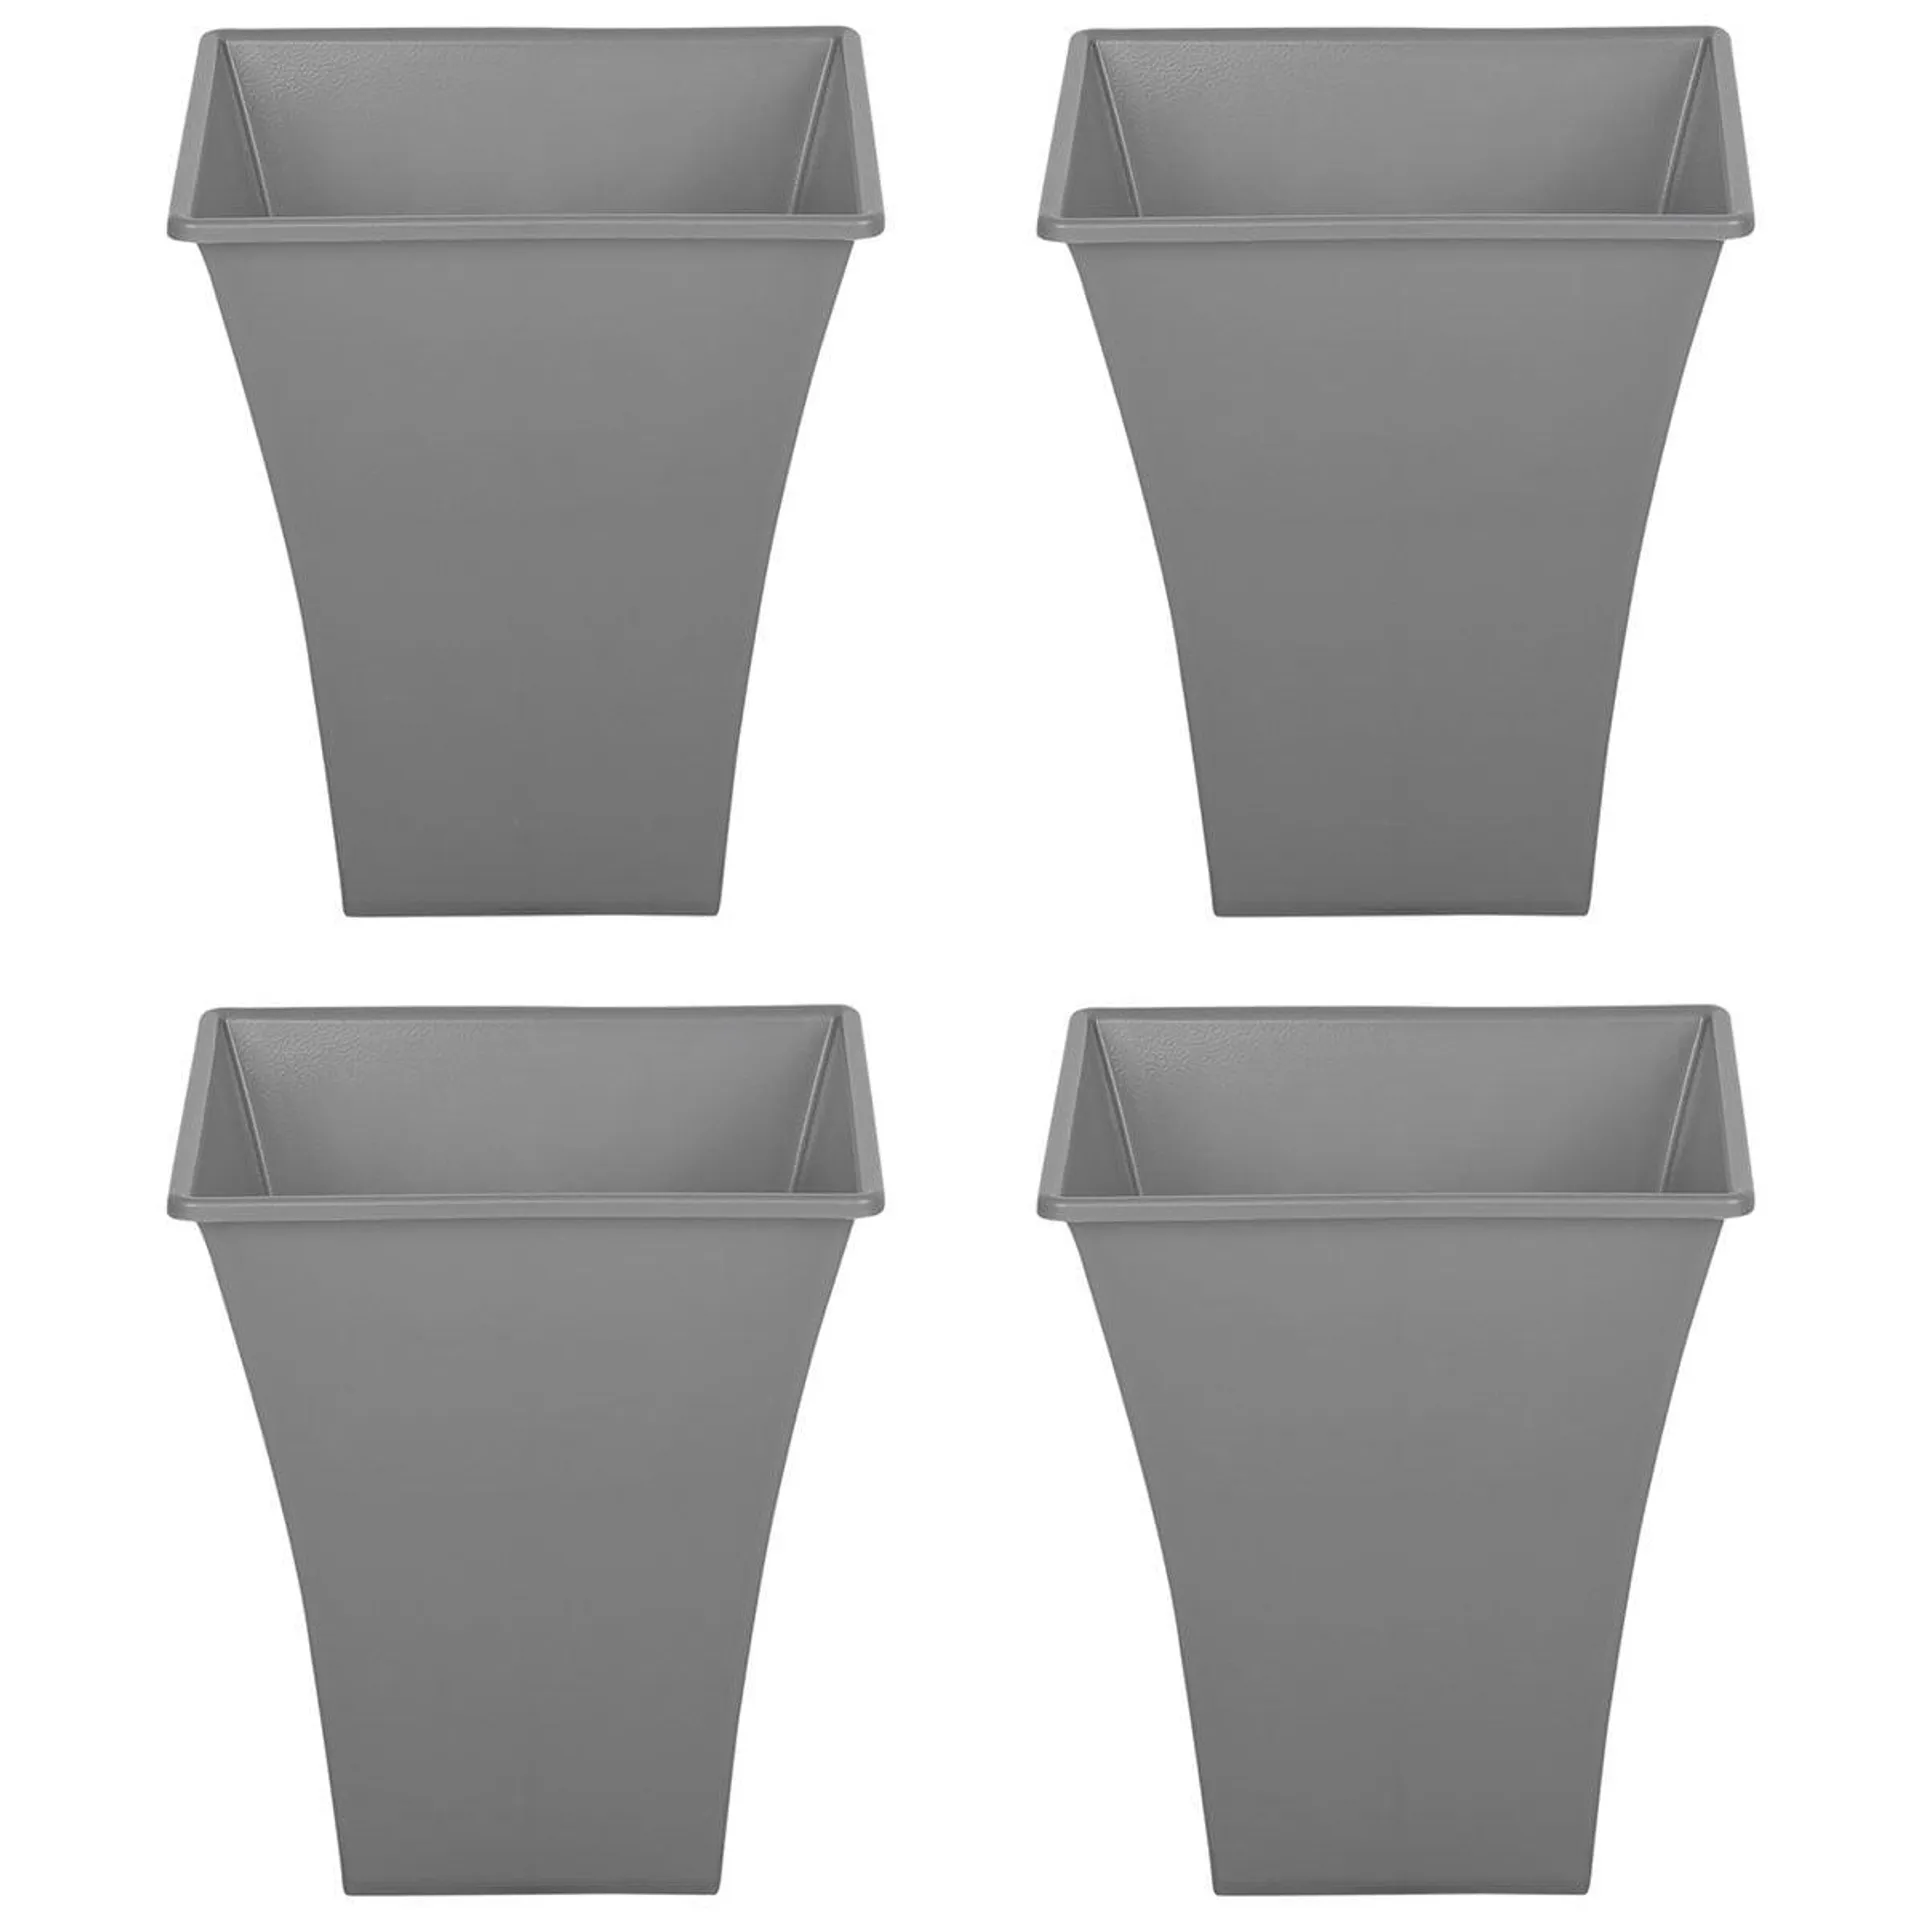 Upcycled Square Metallica Planters 23cm - Pack of 4